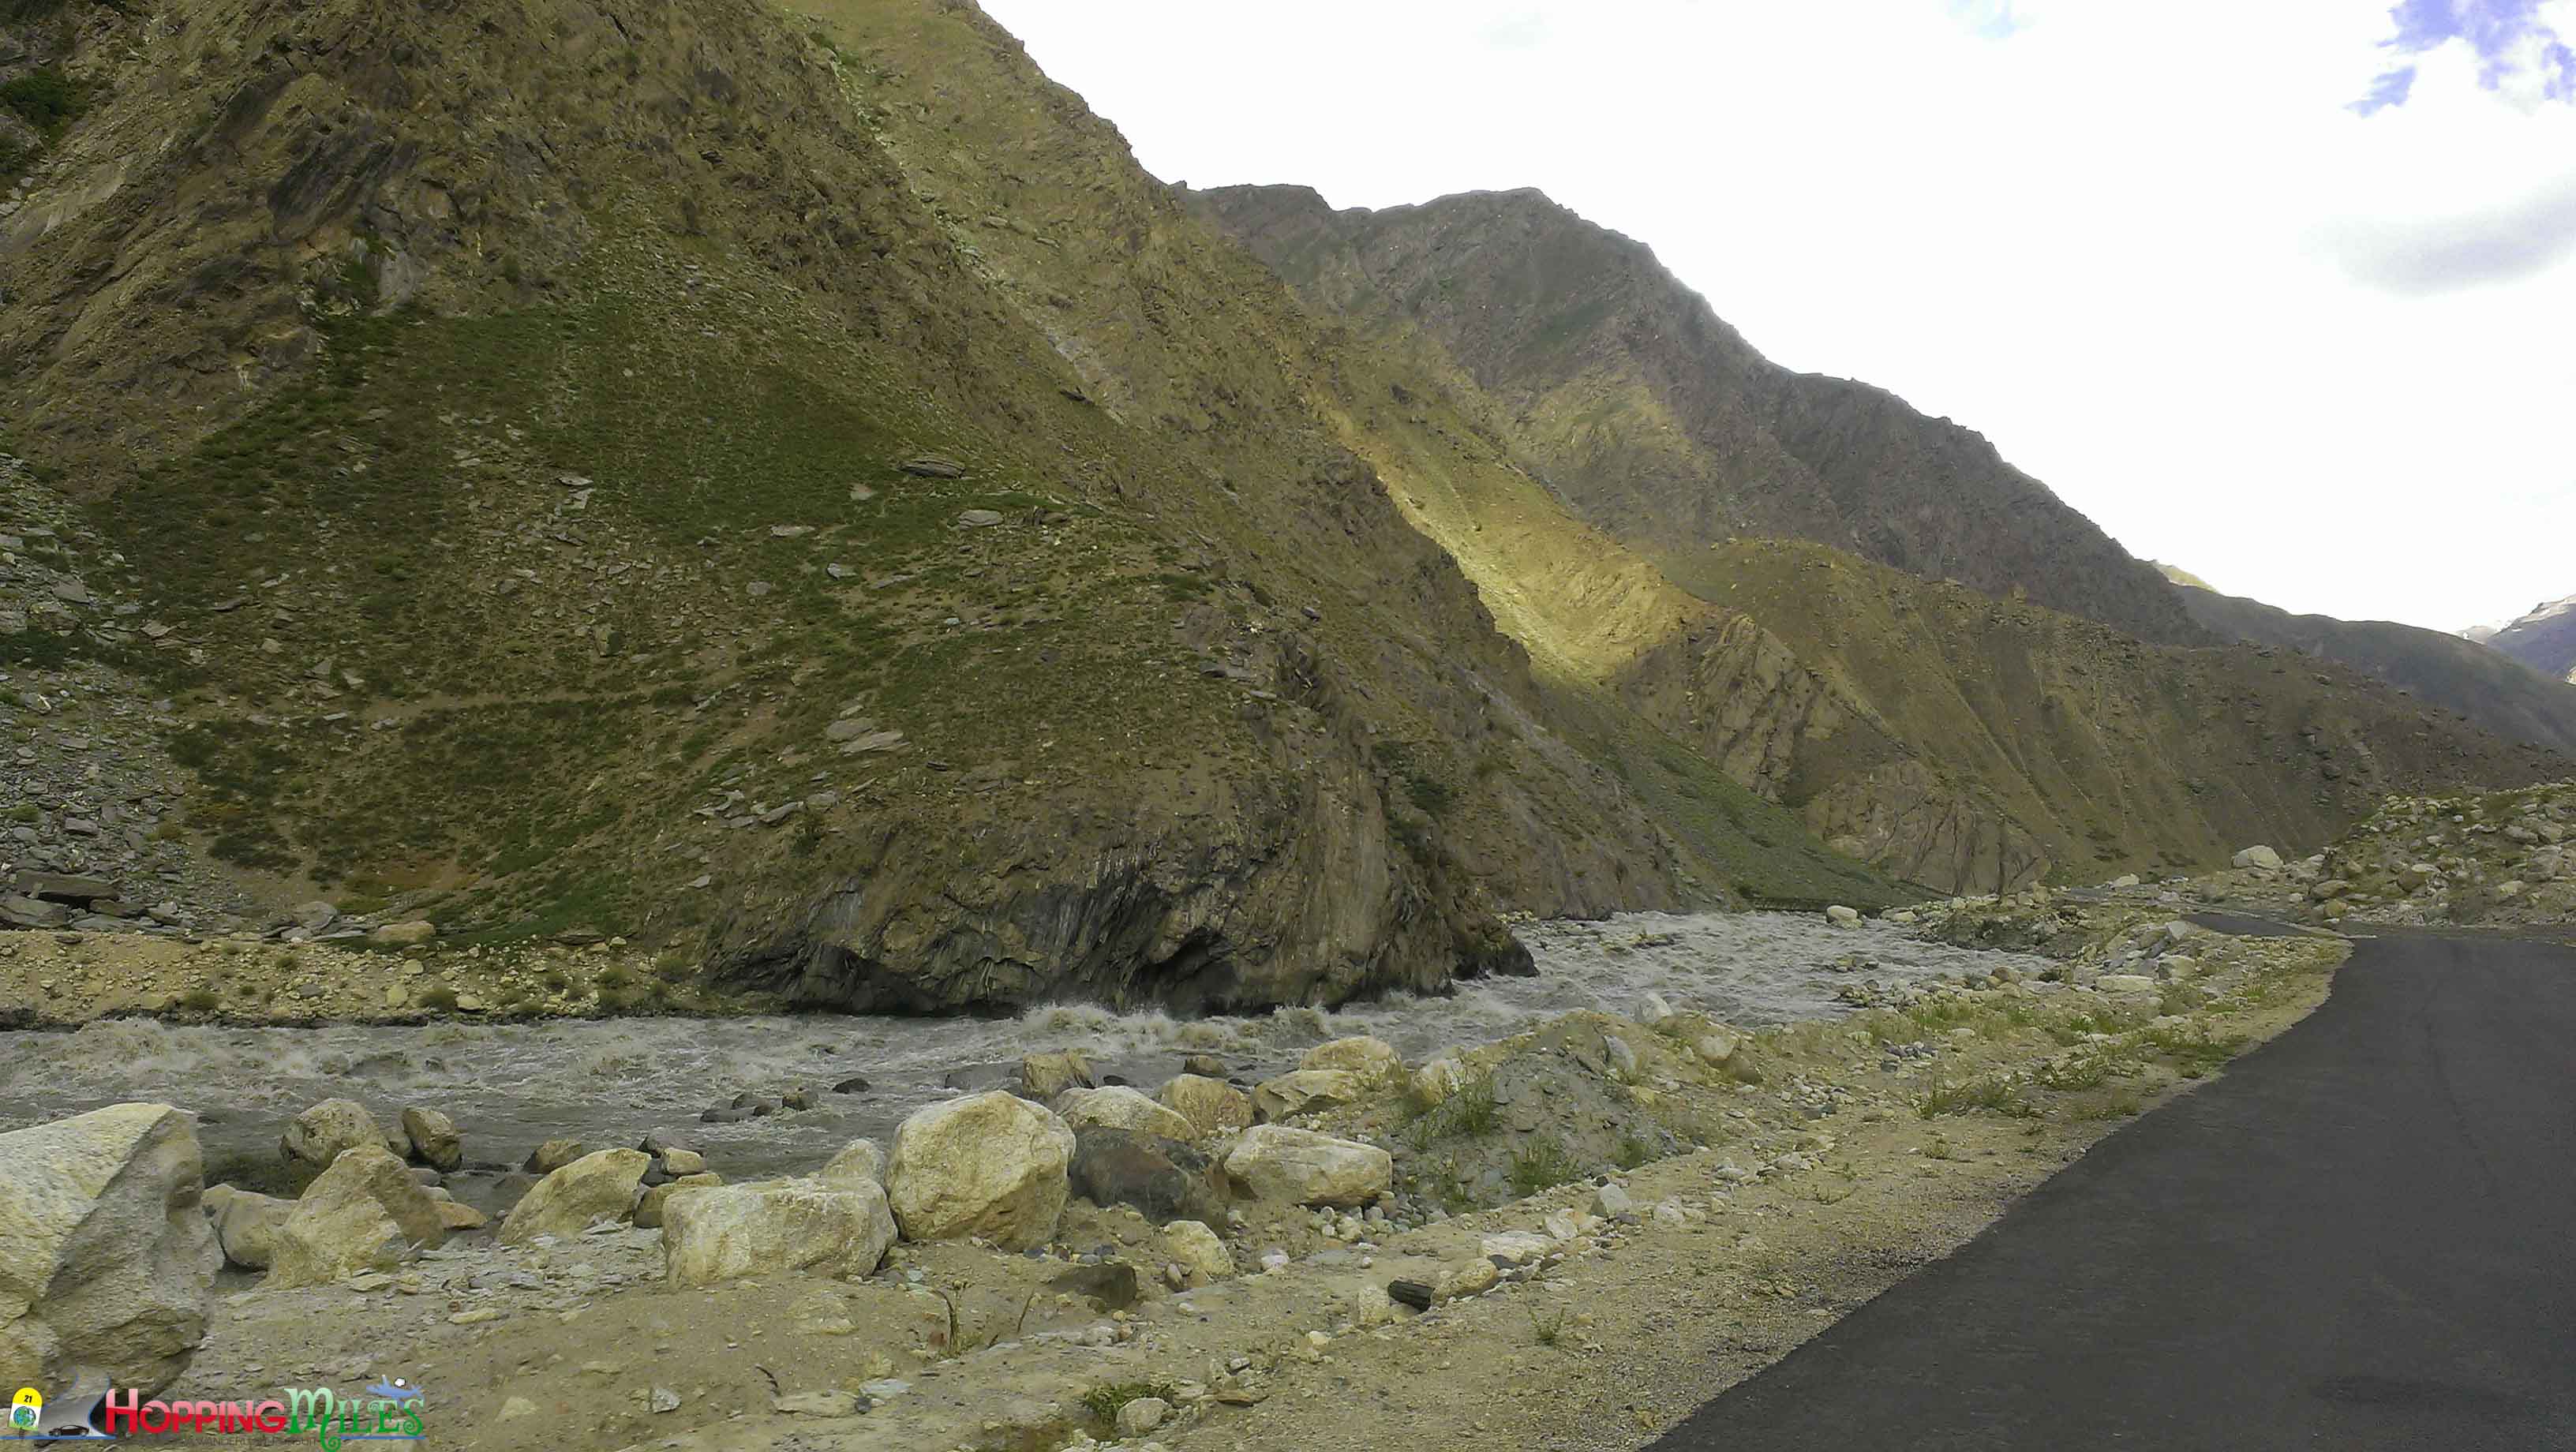 Bangalore to Ladakh Road Trip in a Fiat Punto - In 99 pictures